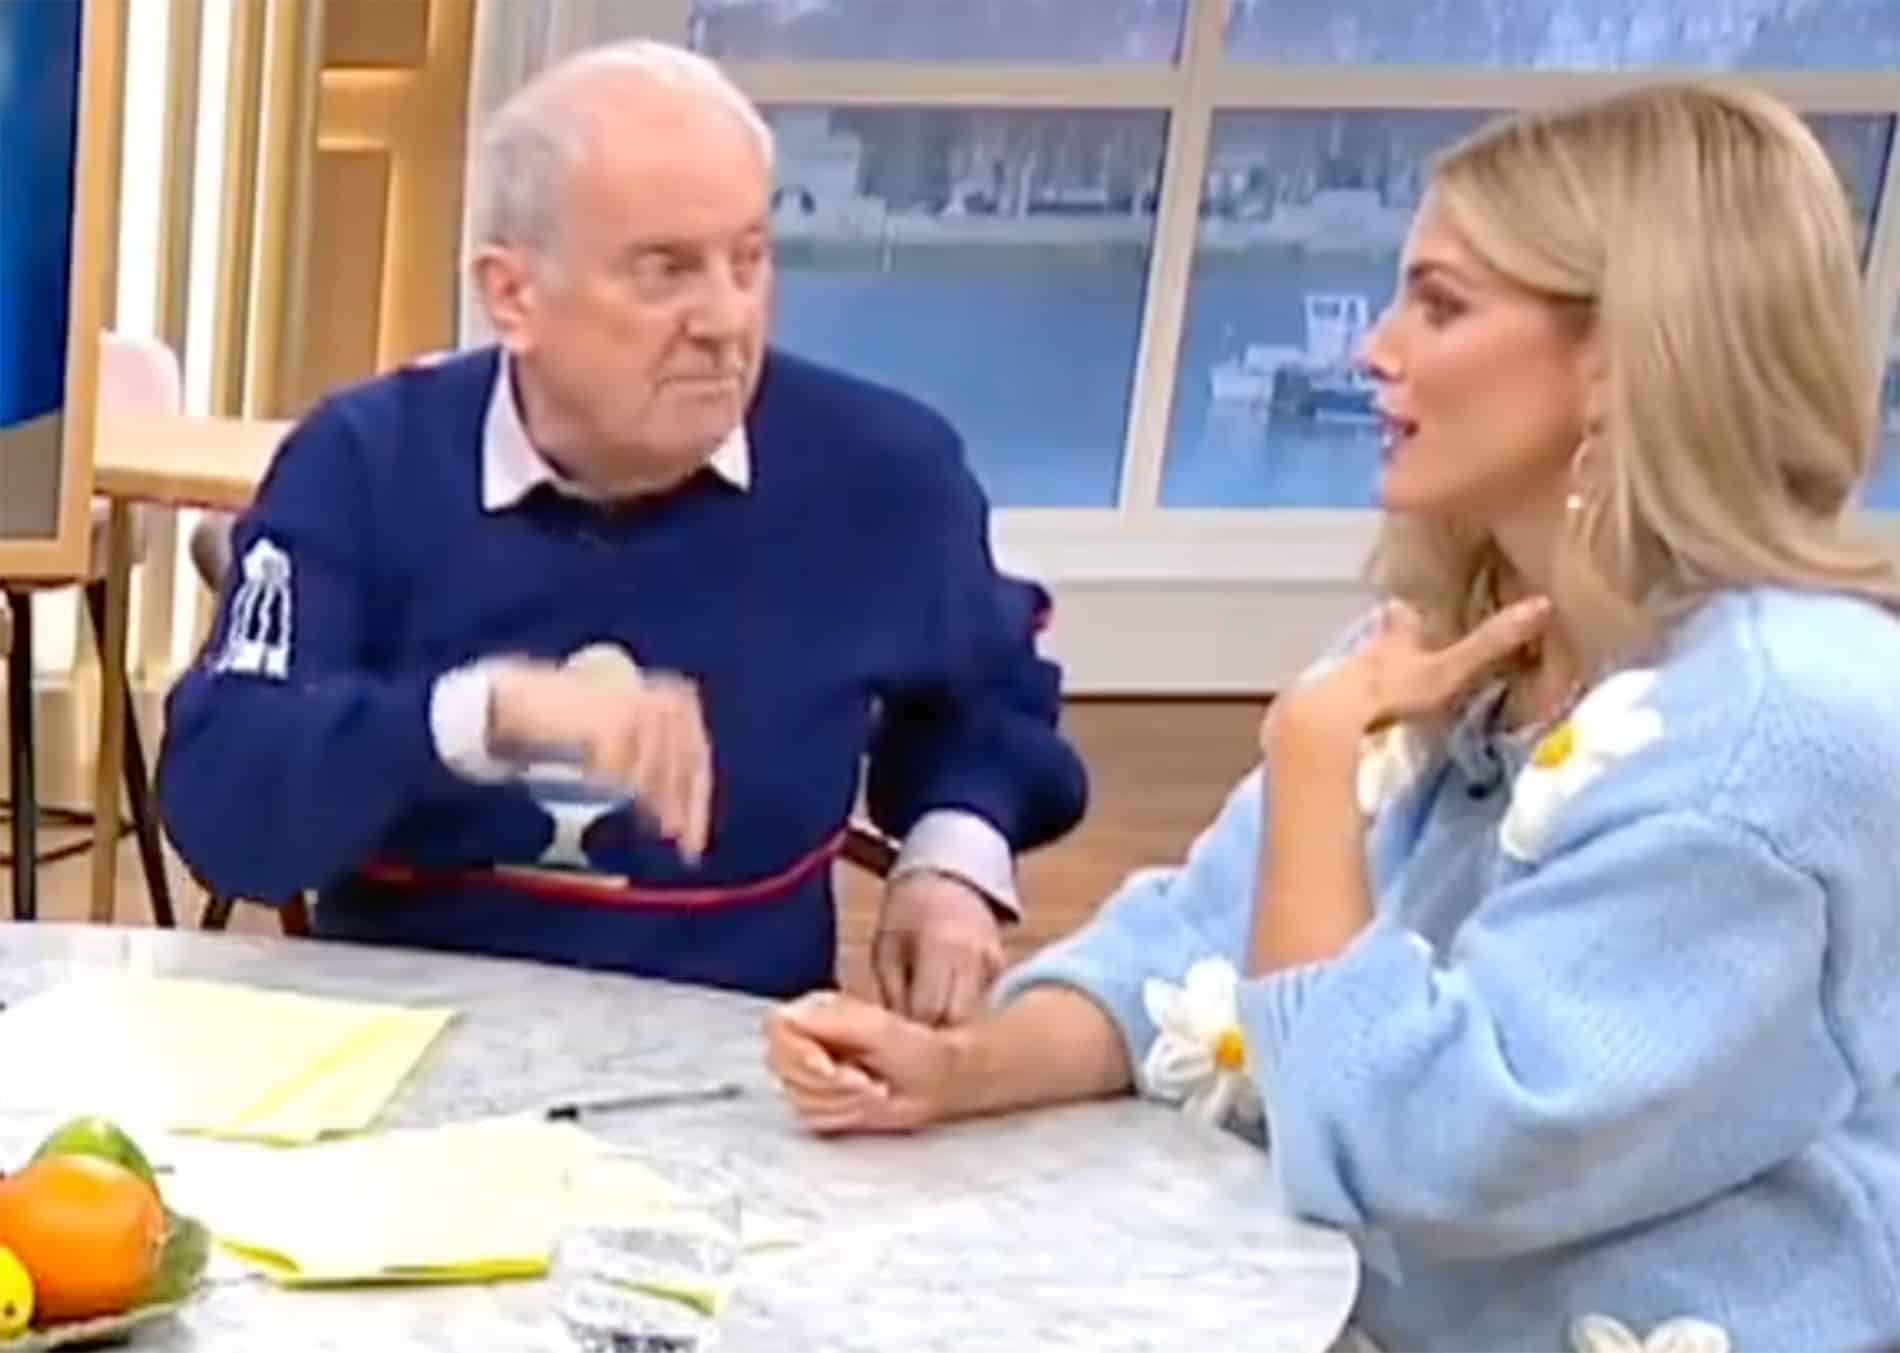 Ashley James masterclass sees Gyles Brandreth walk away with his tail between his legs